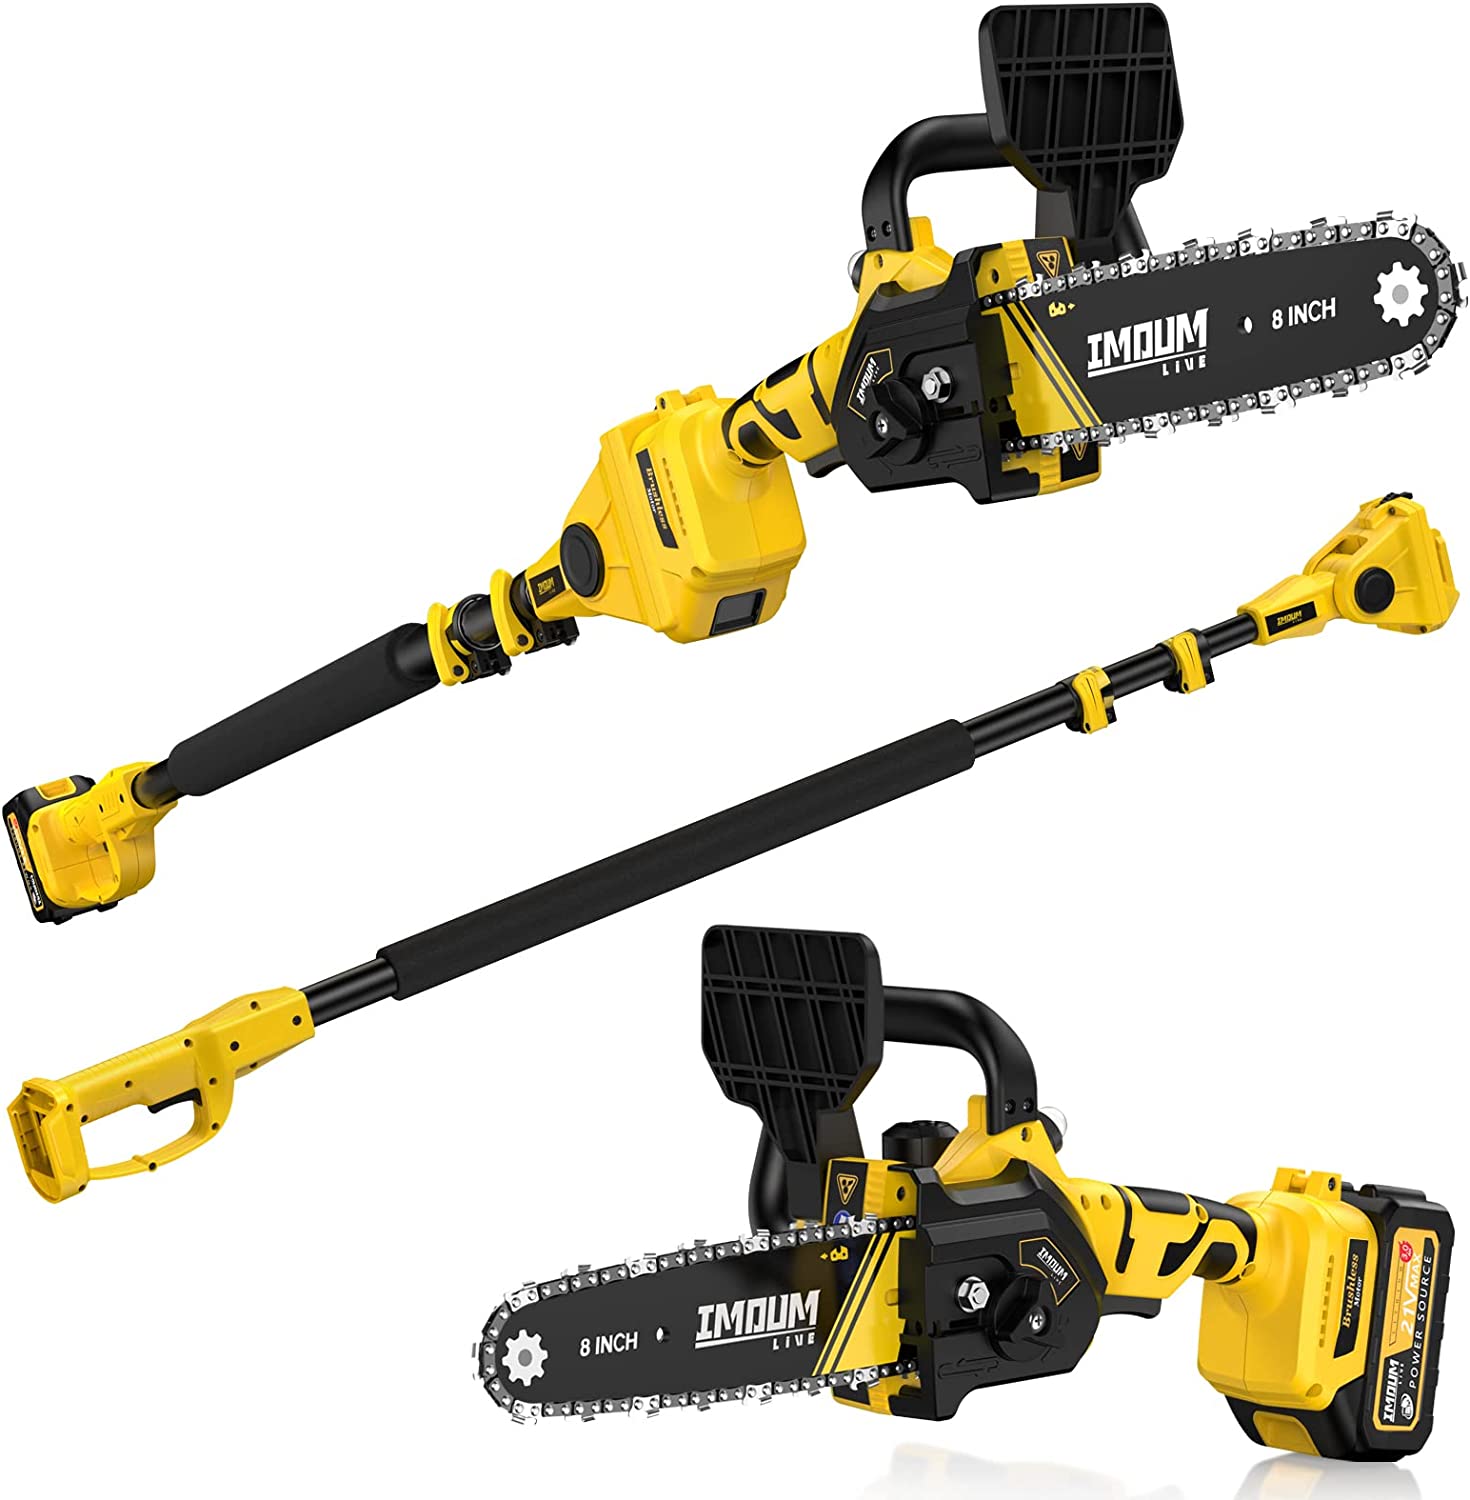 2-in-1 Brushless Pole Saw & 8 Inch Mini Chainsaw